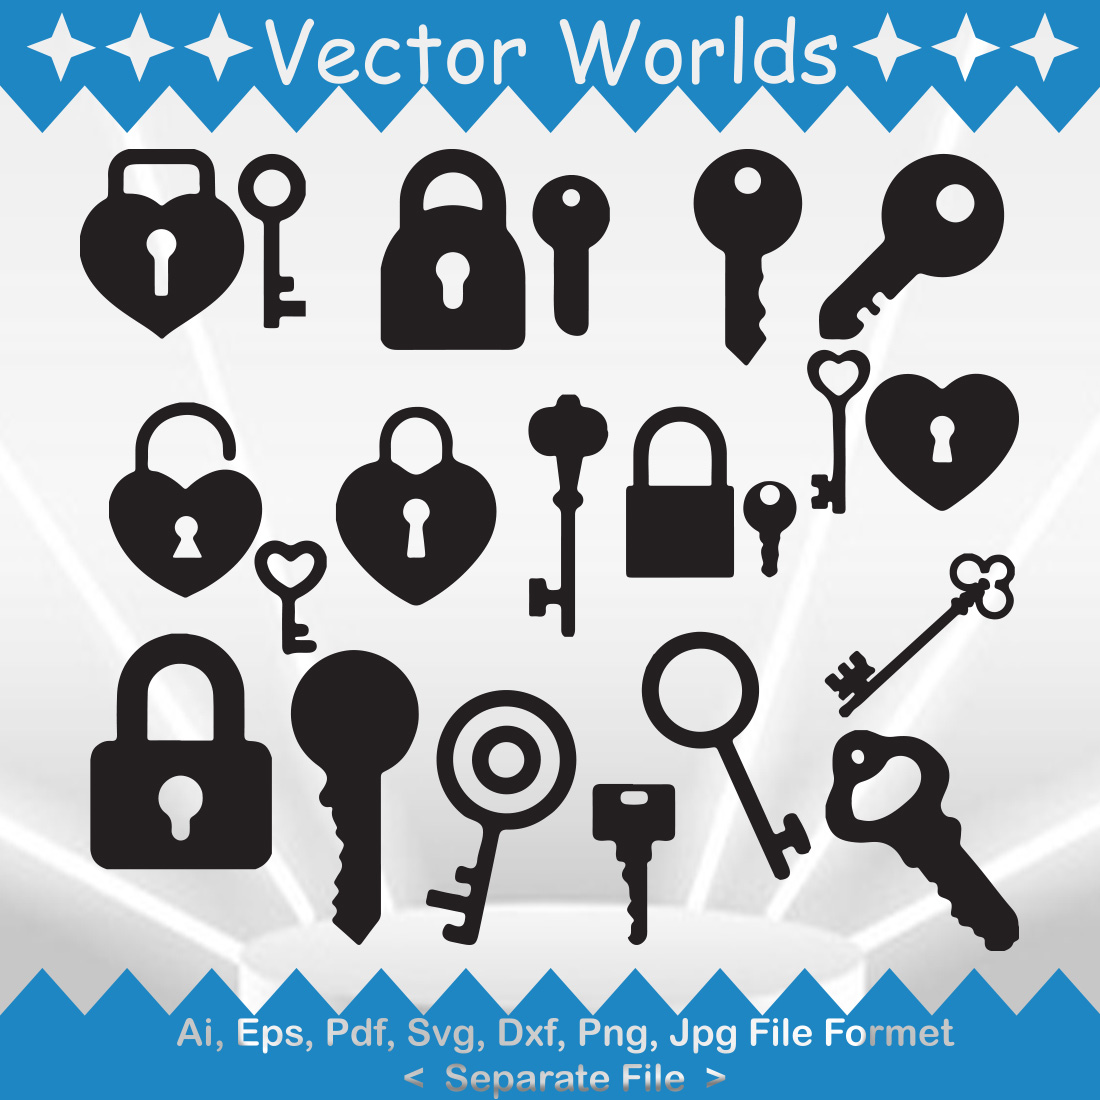 Lock and key SVG Vector Design cover image.